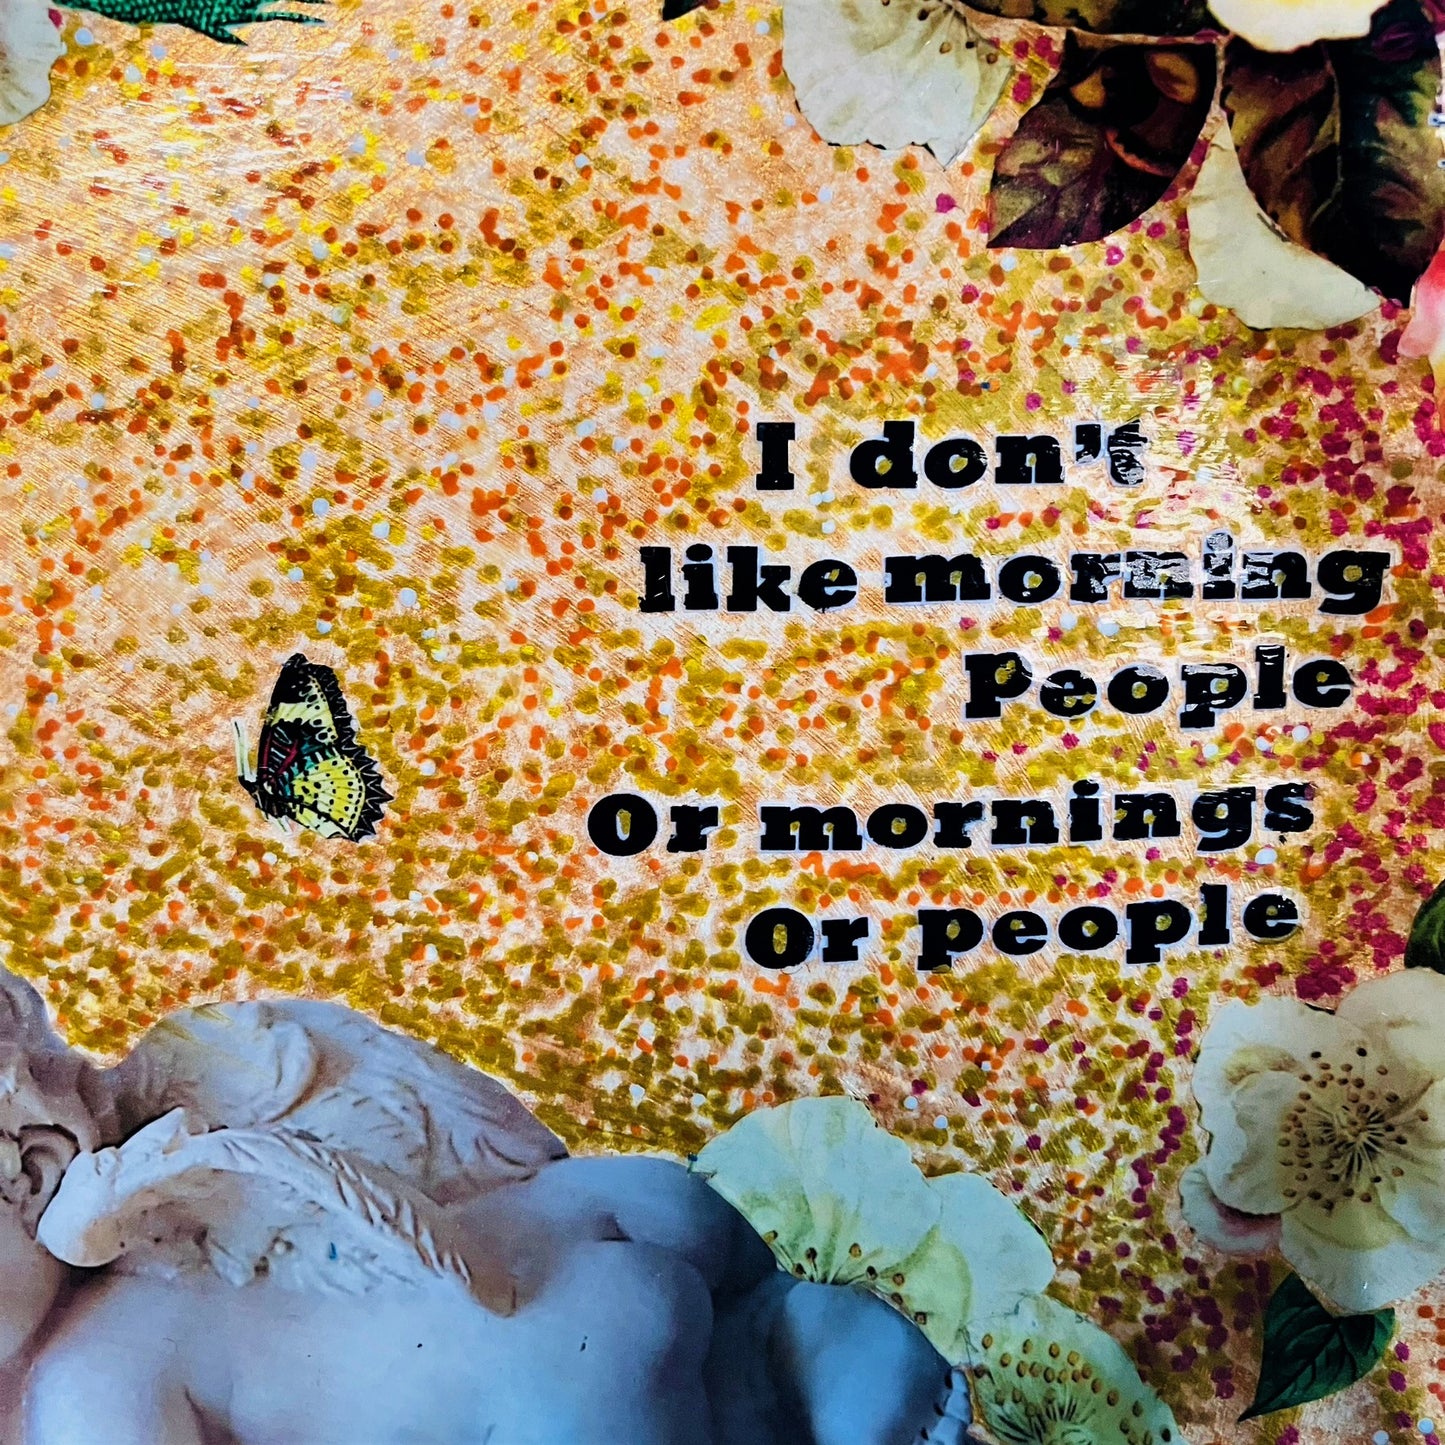 Gold Upcycled Wall Plate - "I Don't Like Morning People Or Mornings Or People" - by House of Frisson